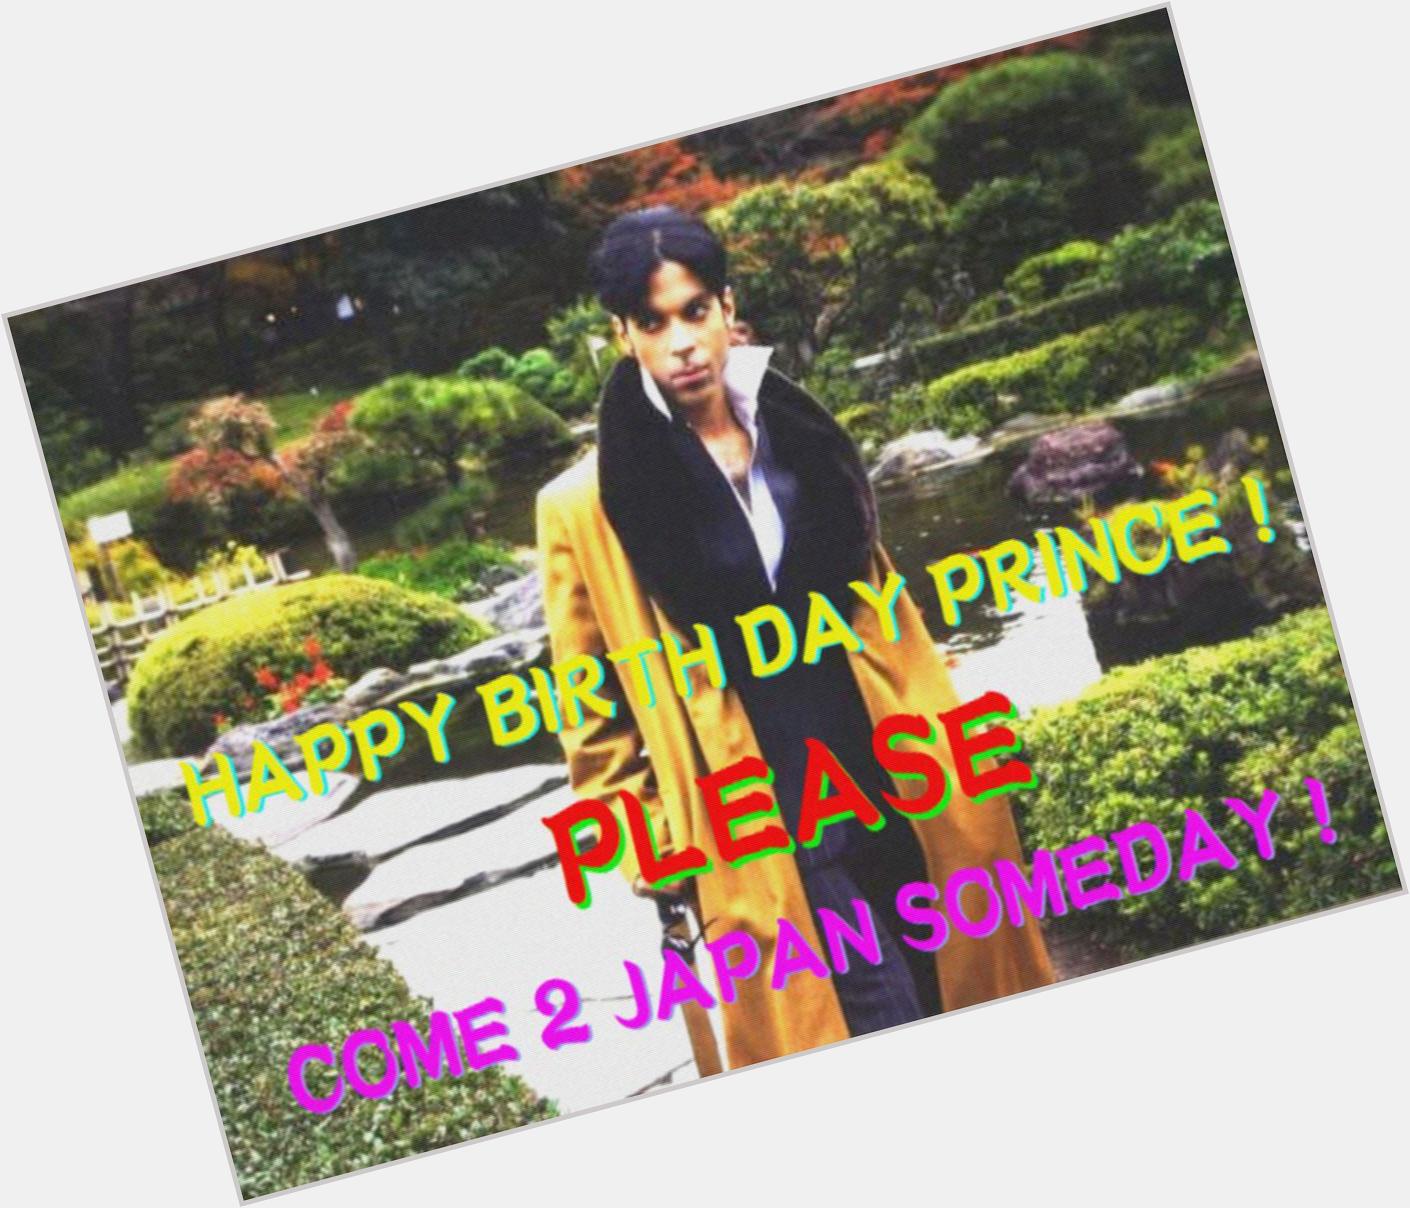  Happy Birthday Prince ! Please !

Come 2 Japan Someday !  